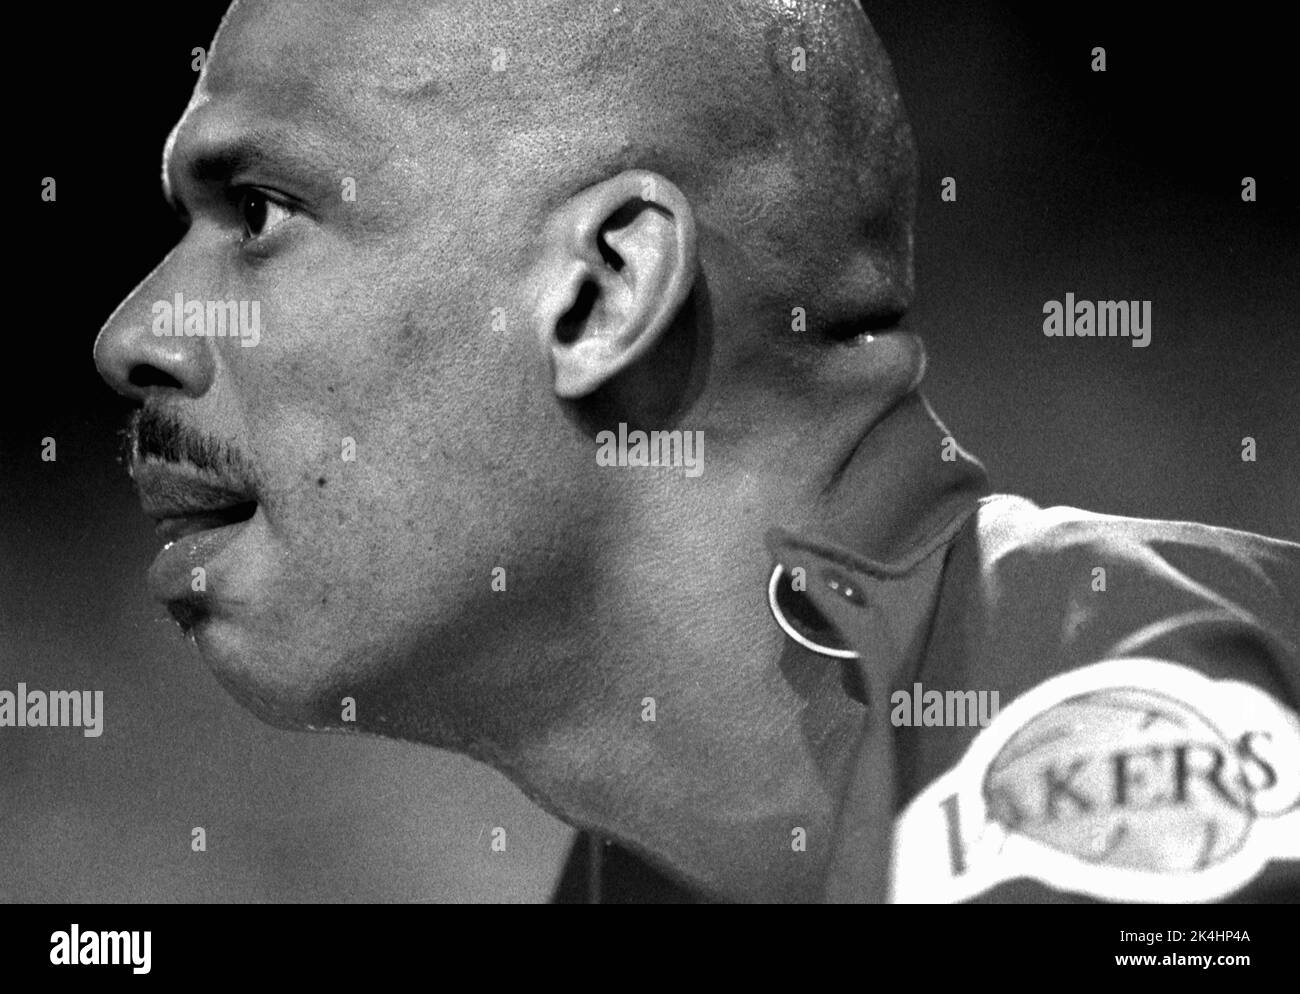 NBA superstar Kareem Abdul-Jabbar of the Los Angeles Lakers is shown in profile on the bench during a game in 1988. Stock Photo